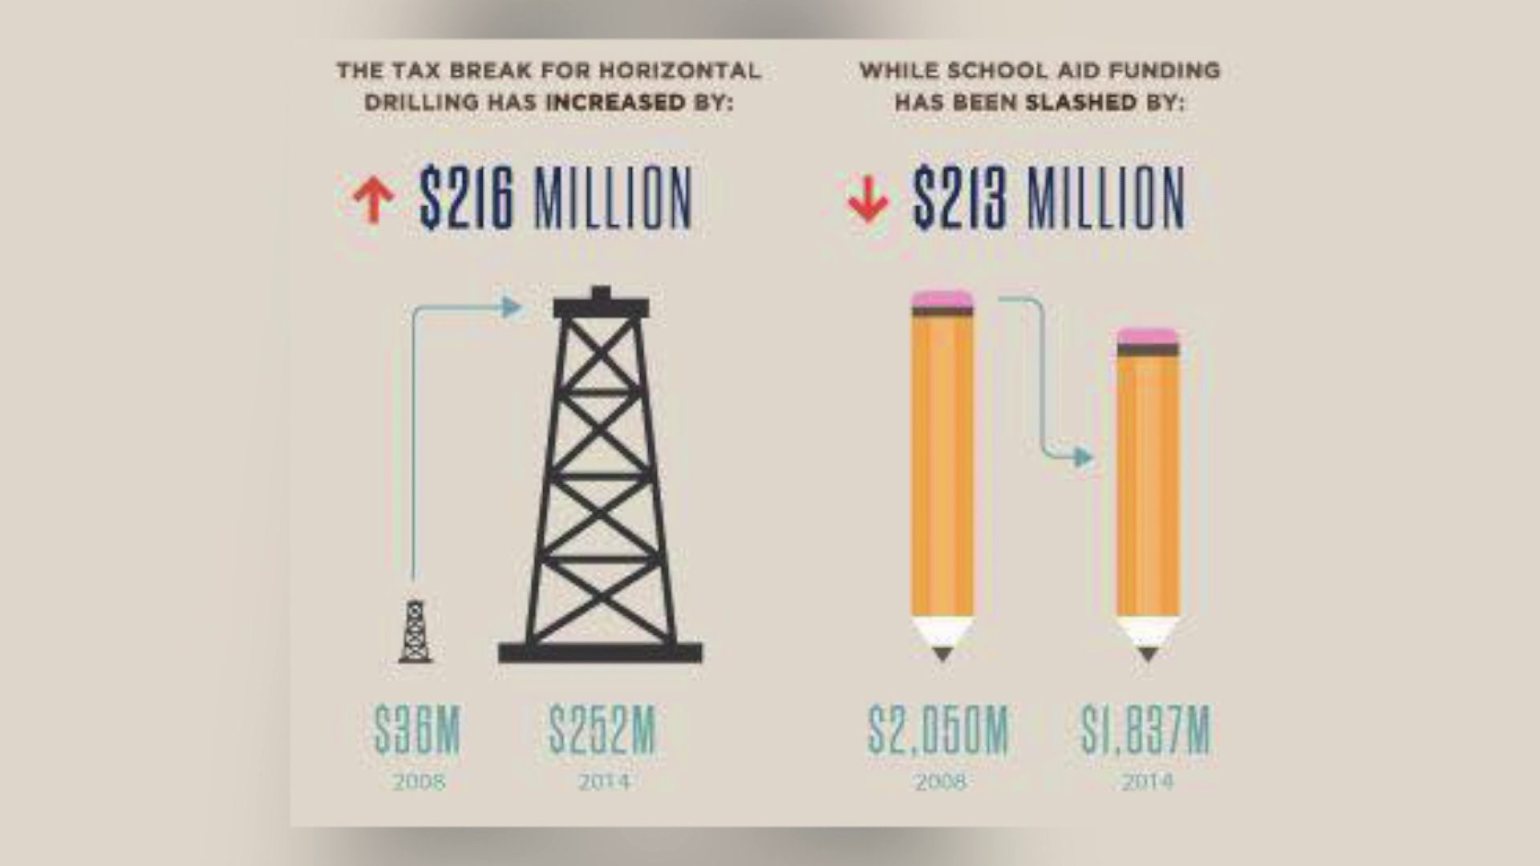 http://www.thelostogle.com/2016/01/26/this-chart-shows-why-oklahoma-schools-are-broke/